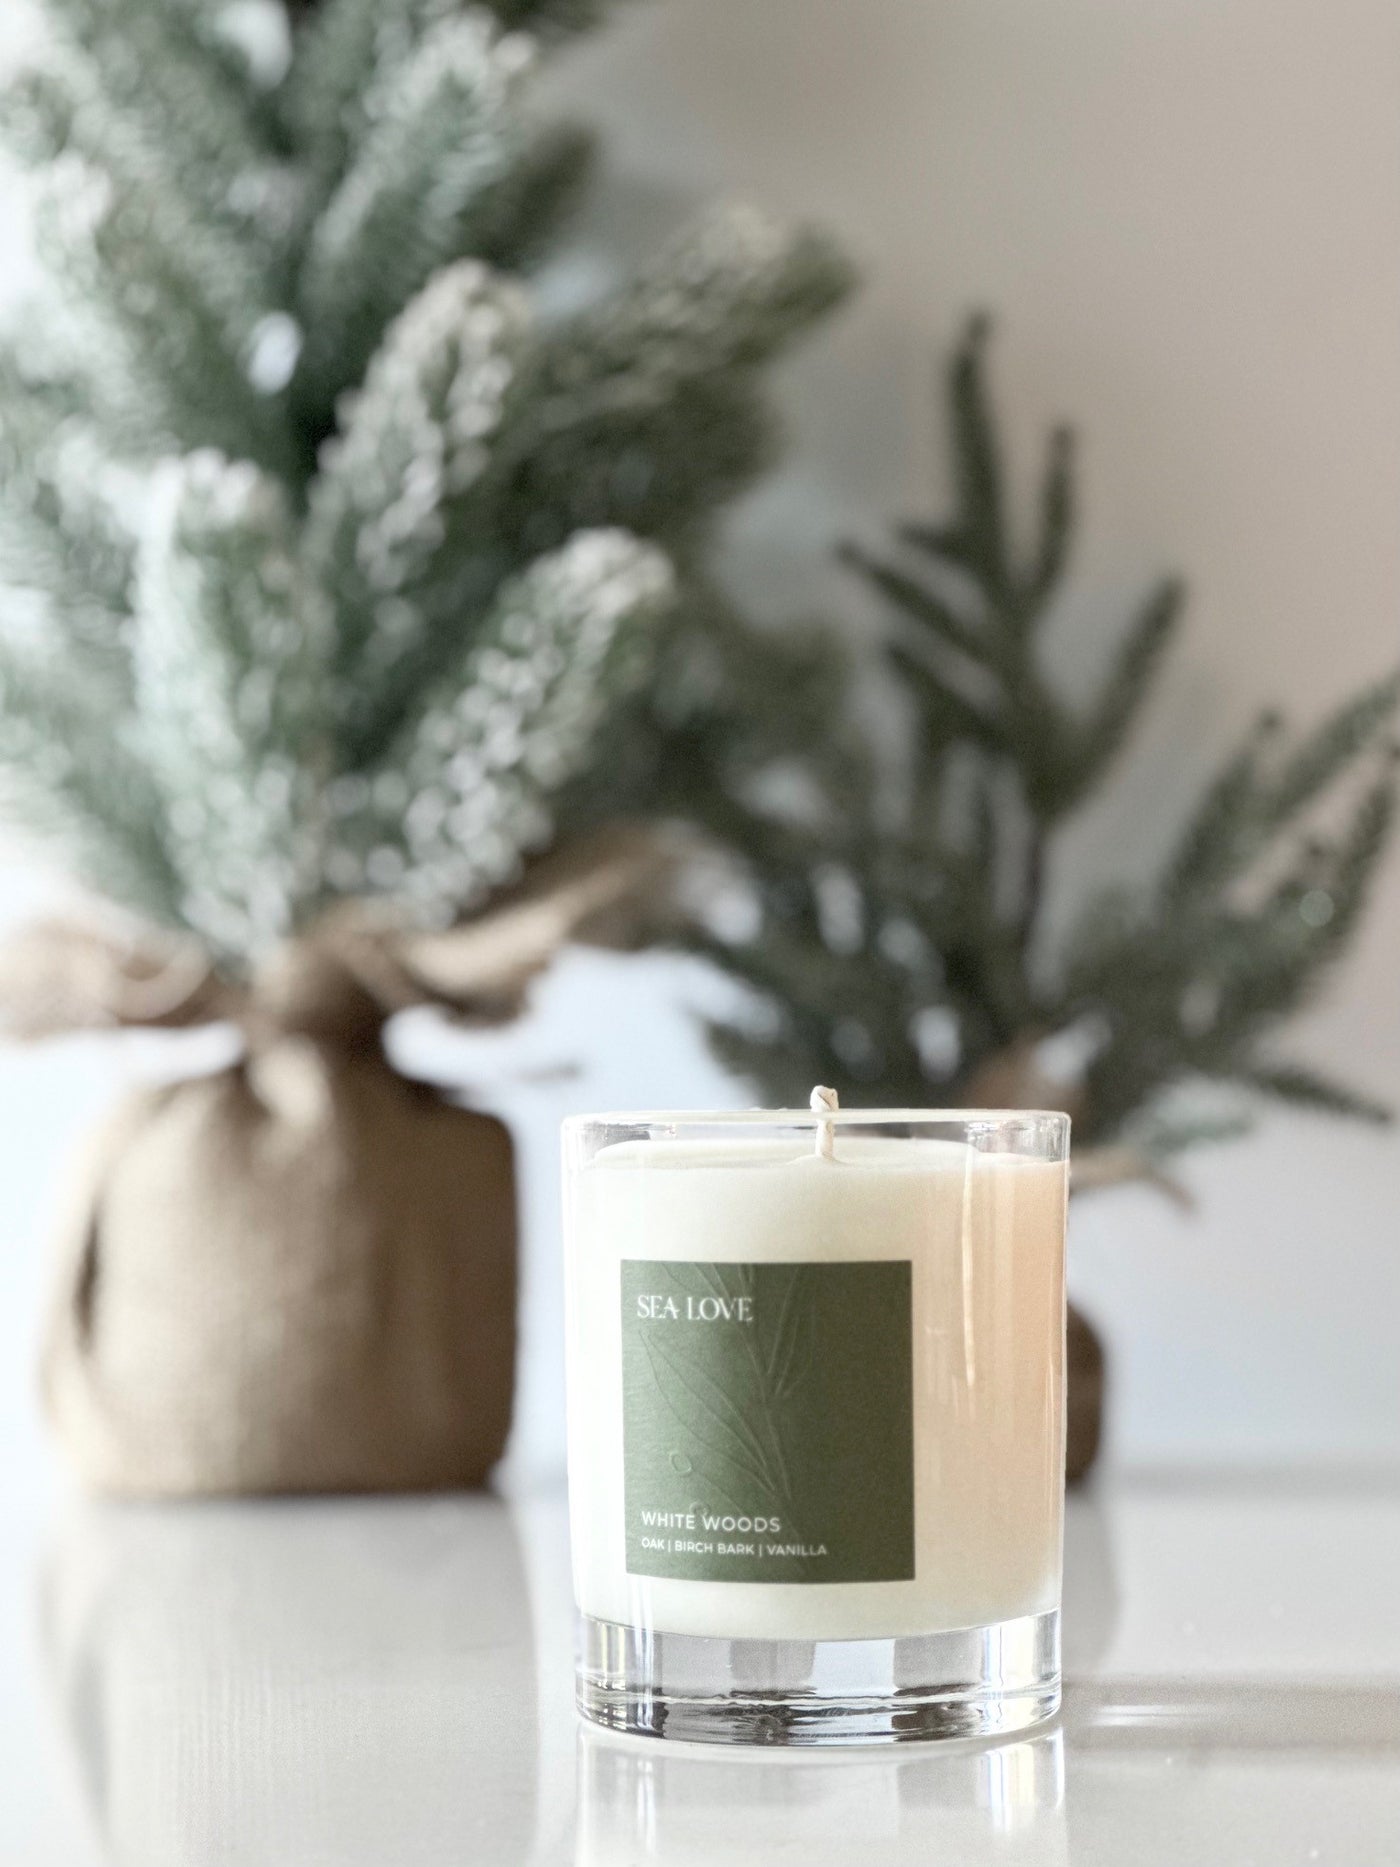 WHITE WOODS SOY CANDLE